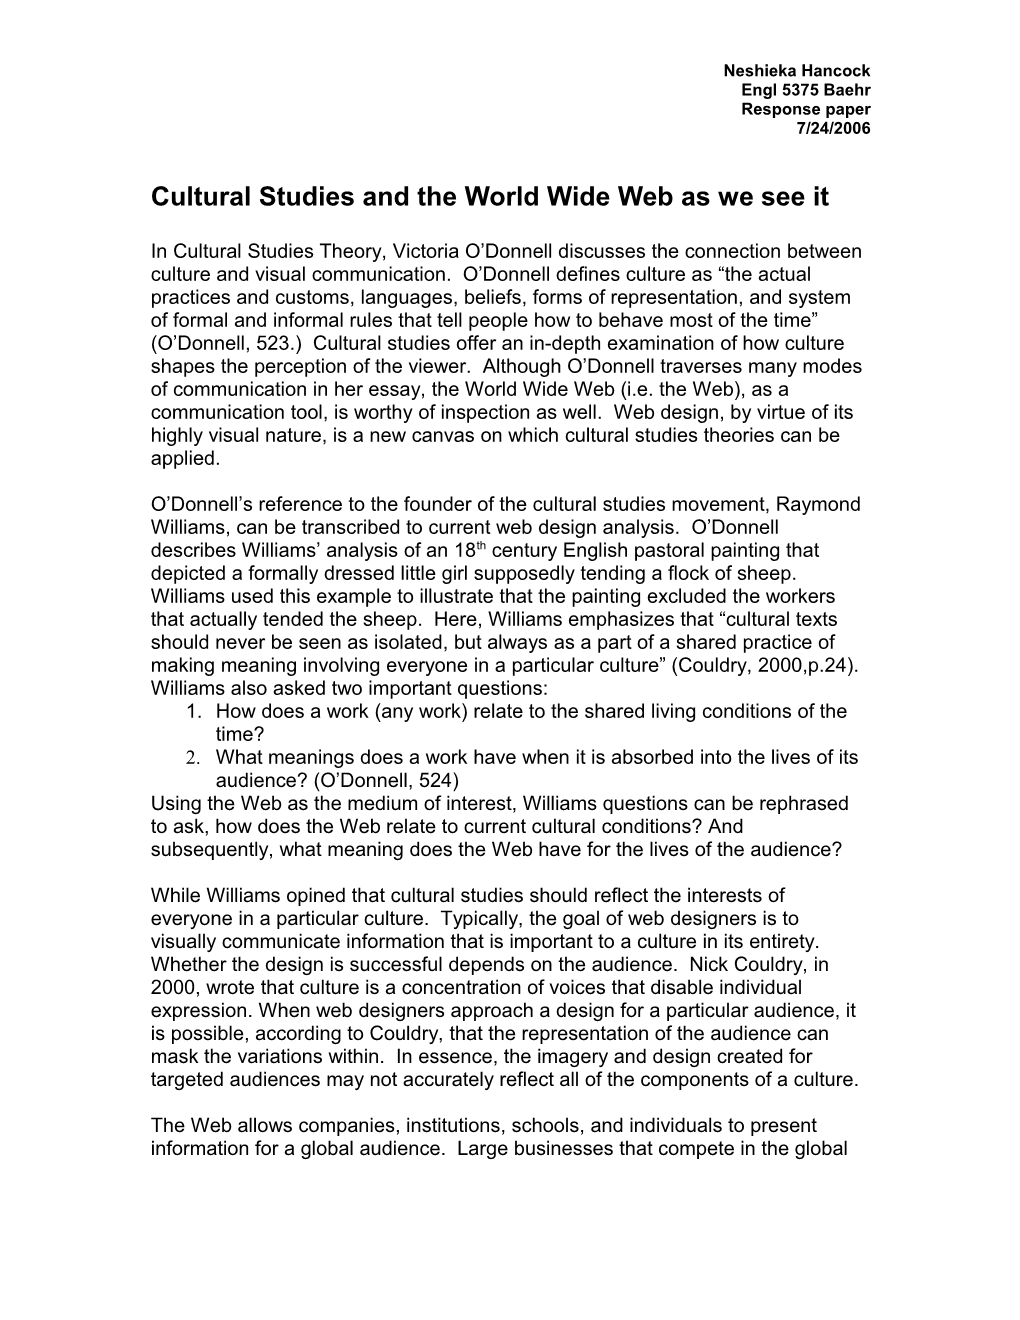 Cultural Studies and the World Wide Web As We See It